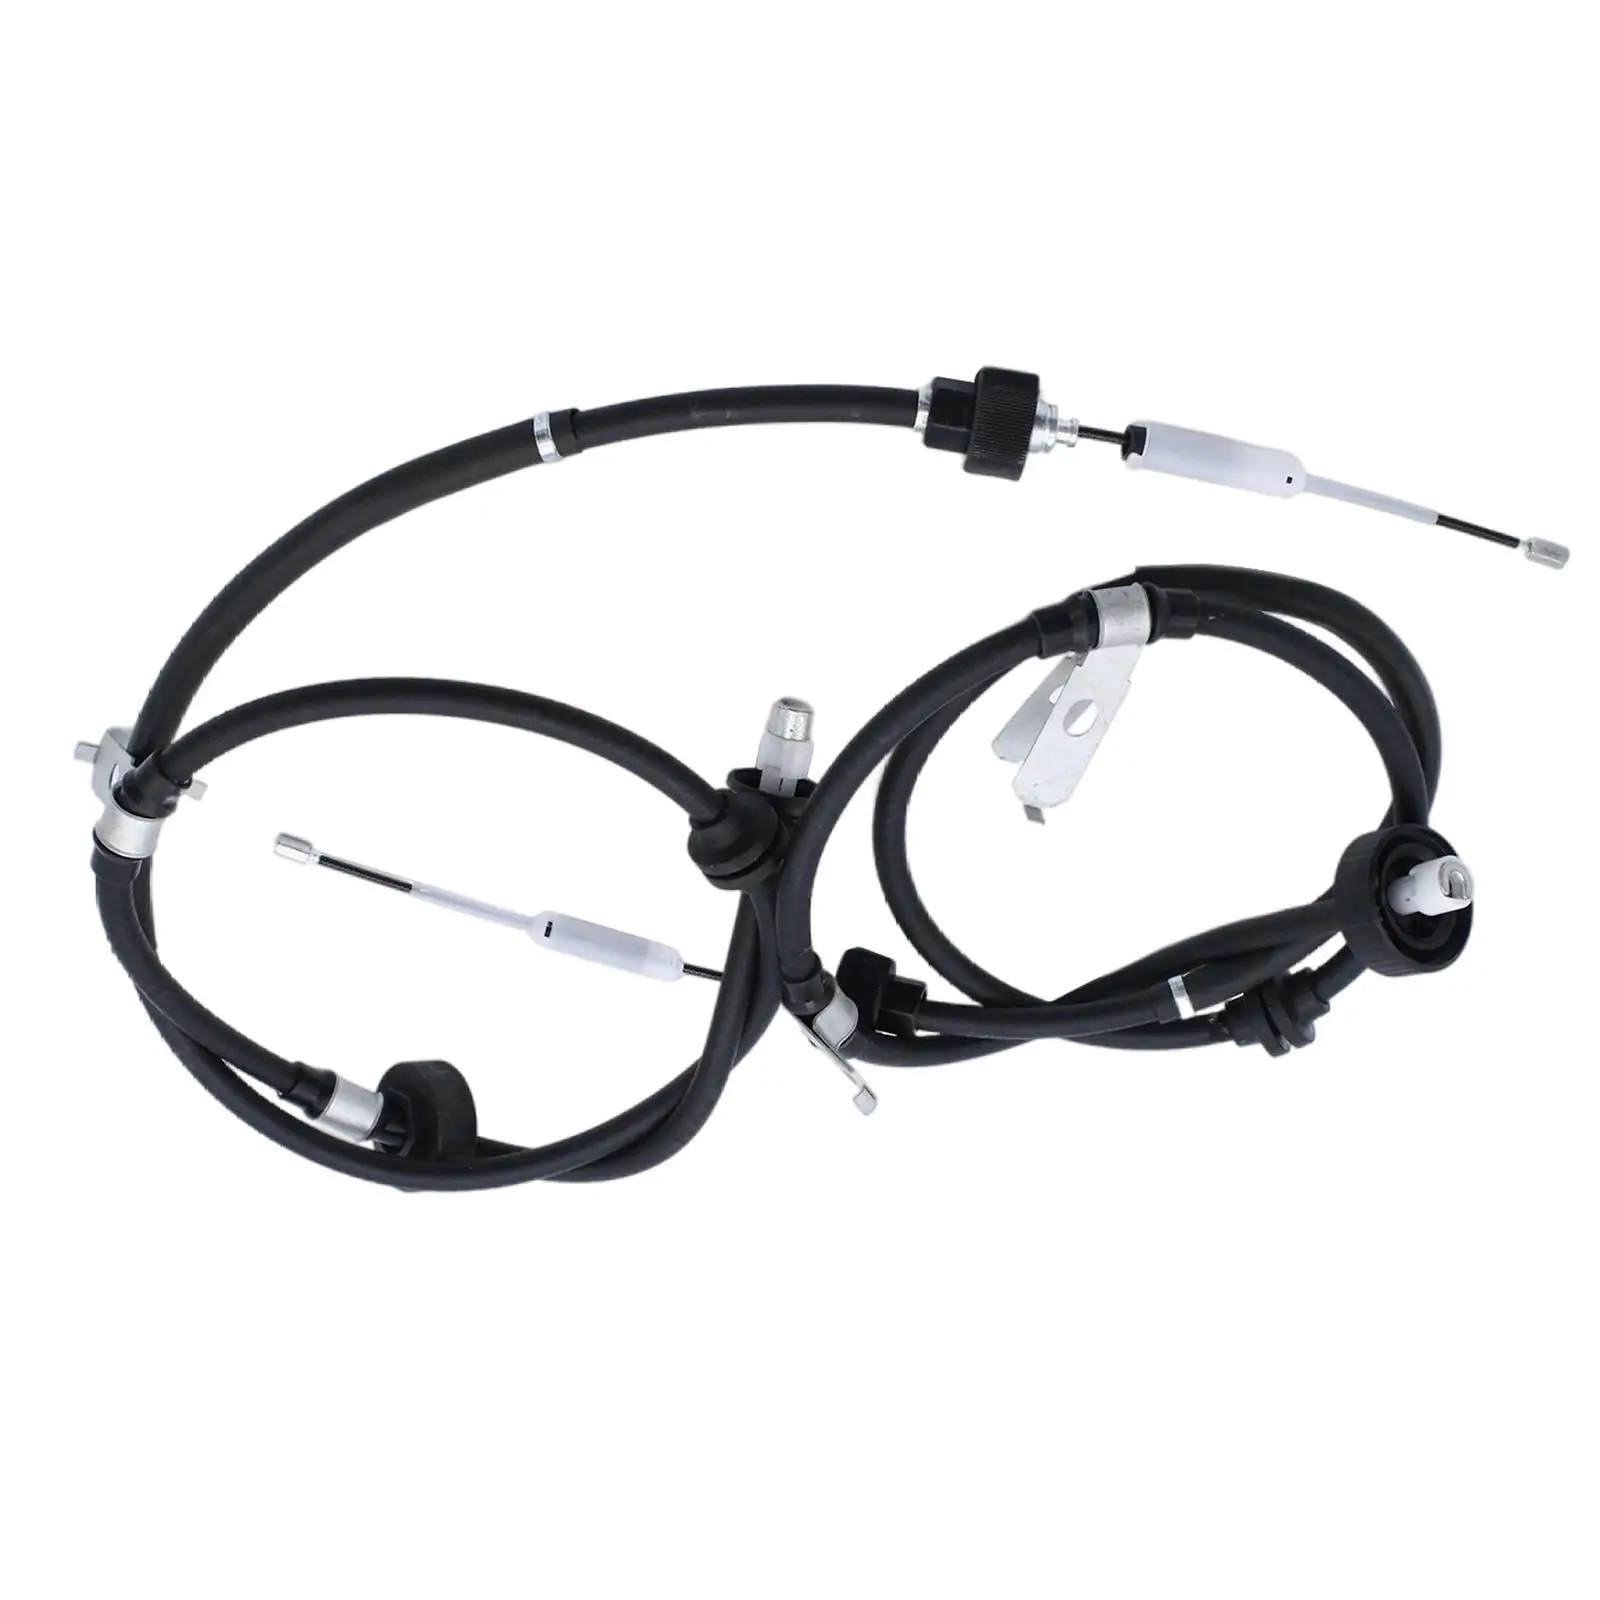 Brake Cable LR018470 2Pcs Fit for Discovery 04-17 Direct Replaces Accessories Easy to Install